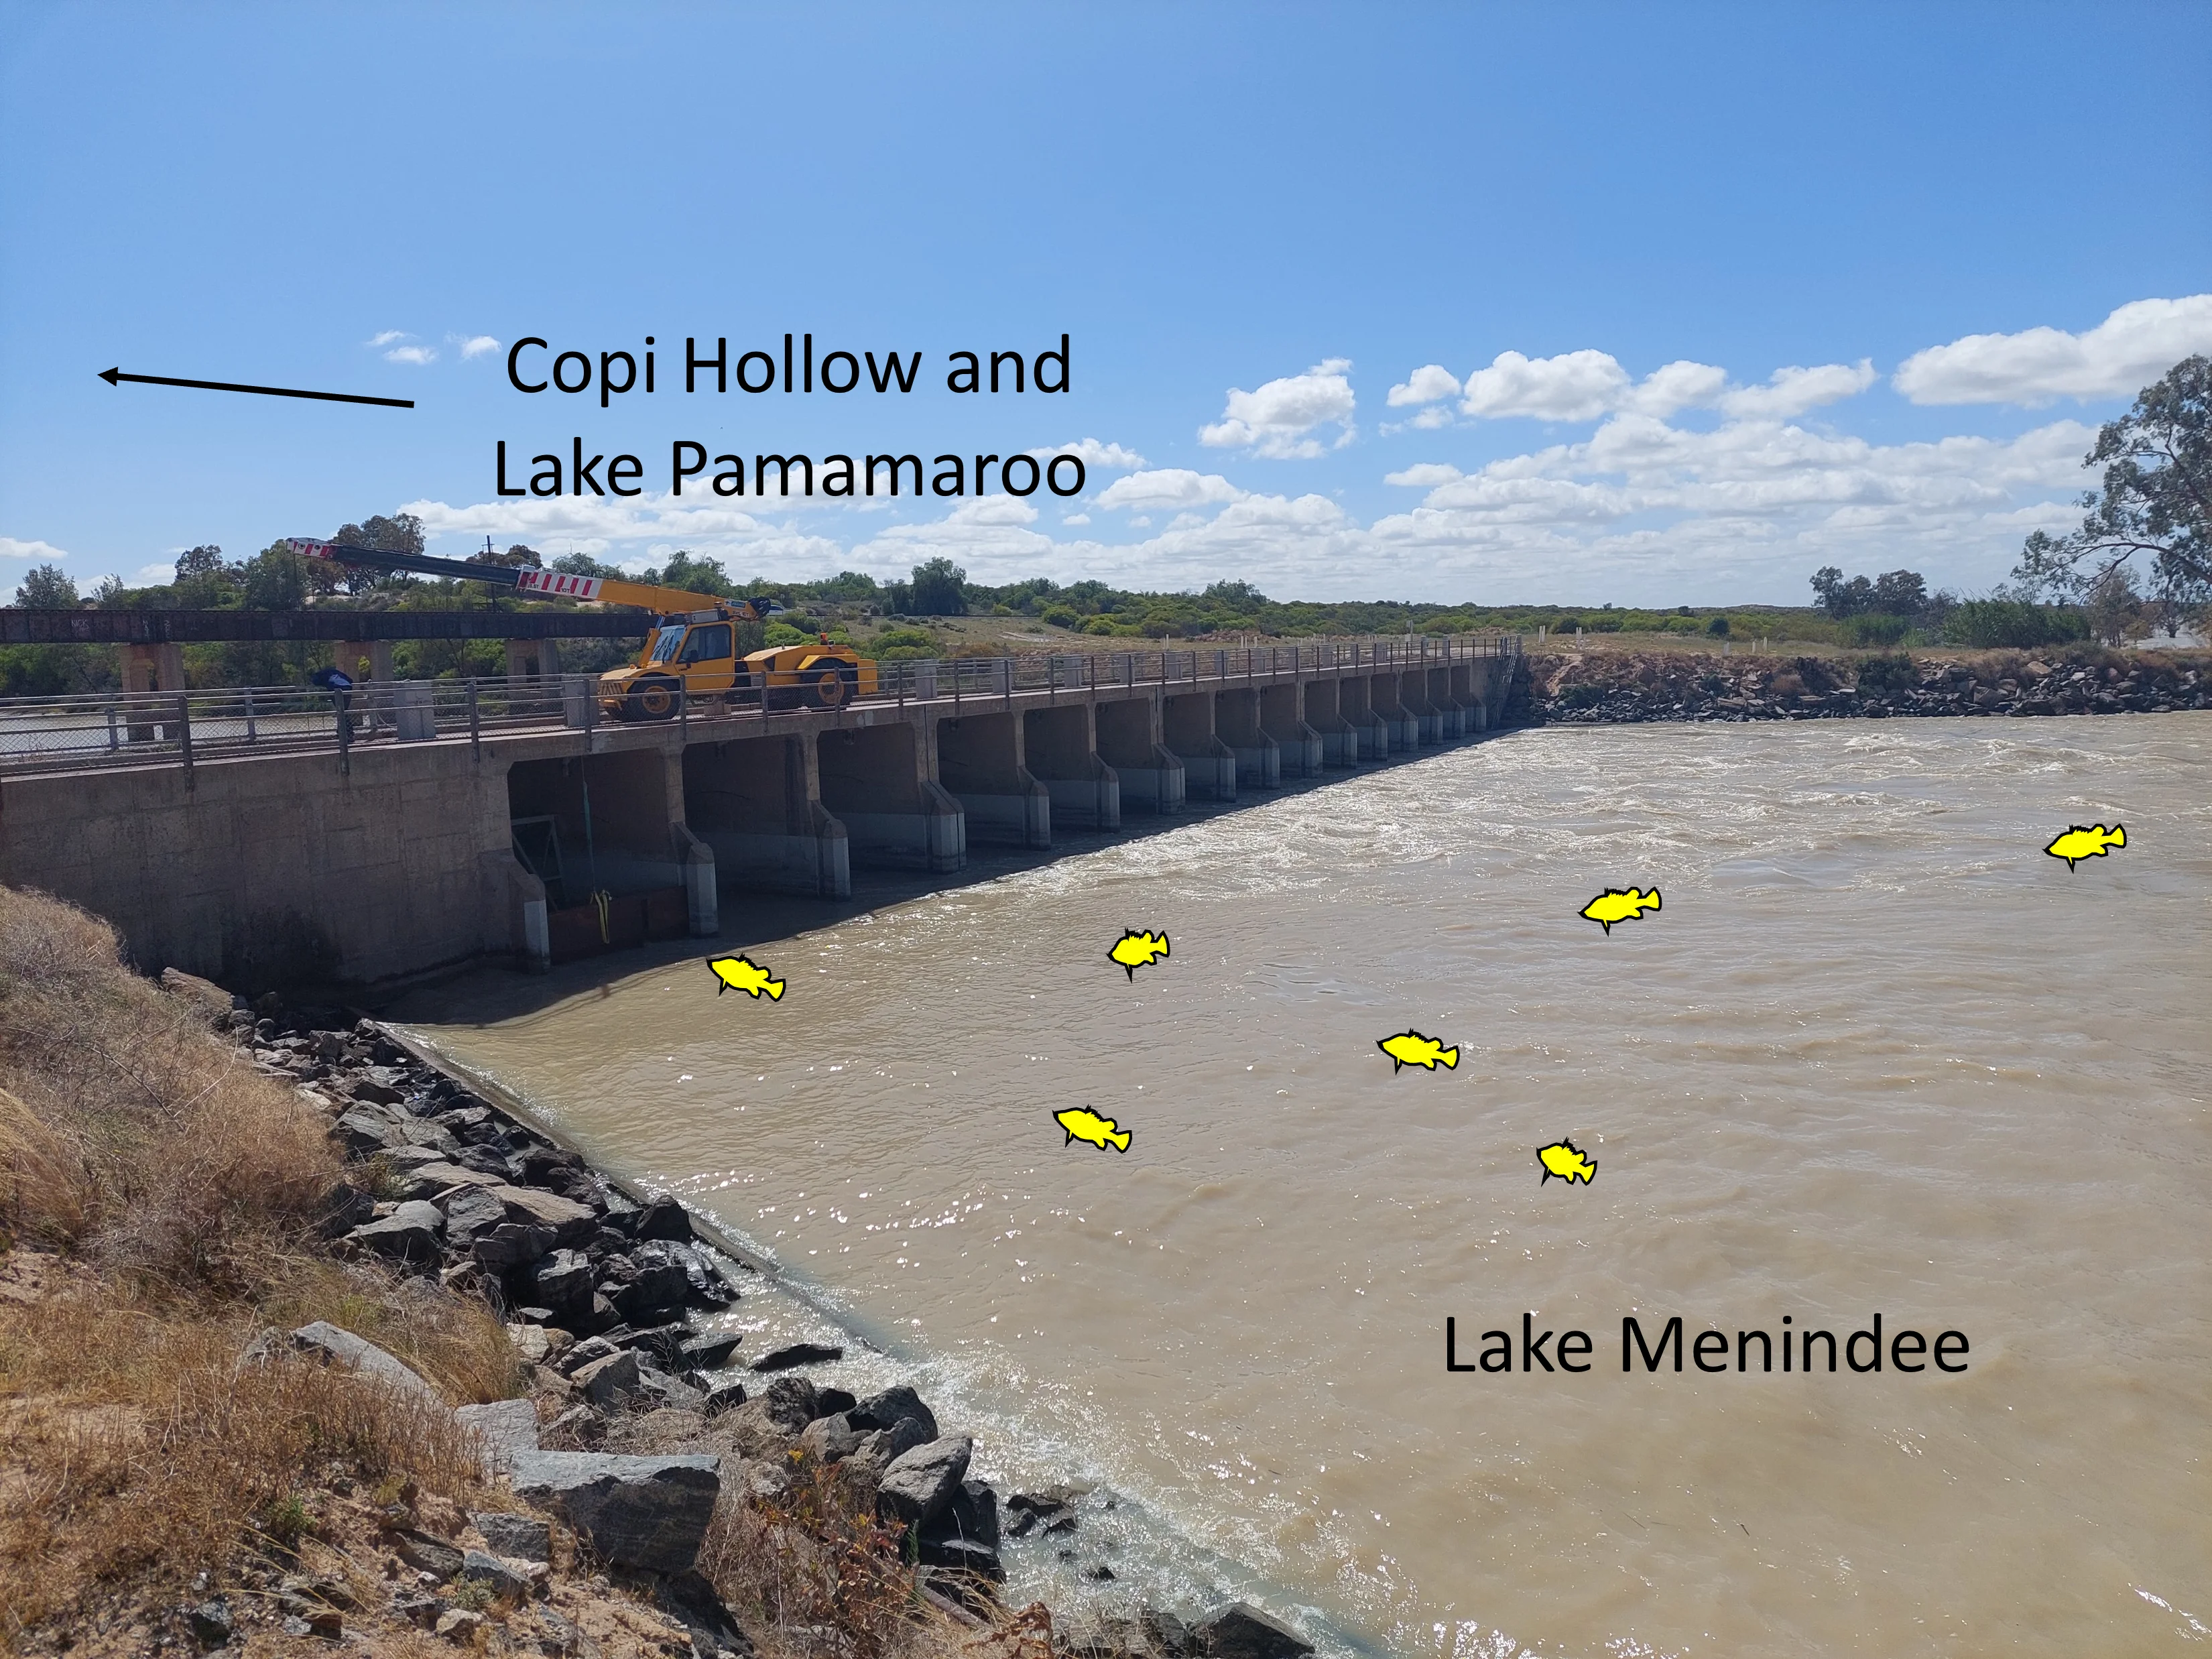 A temporary fish ladder (vertical slot baffles) in one gate of the Lake Menindee inlet regulator in December 2022 to facilitate passage upstream through the regulator from Lake Menindee to Copi Hollow and Lake Pamamaroo. (Credit: NSW DPI Fisheries, WaterNSW).